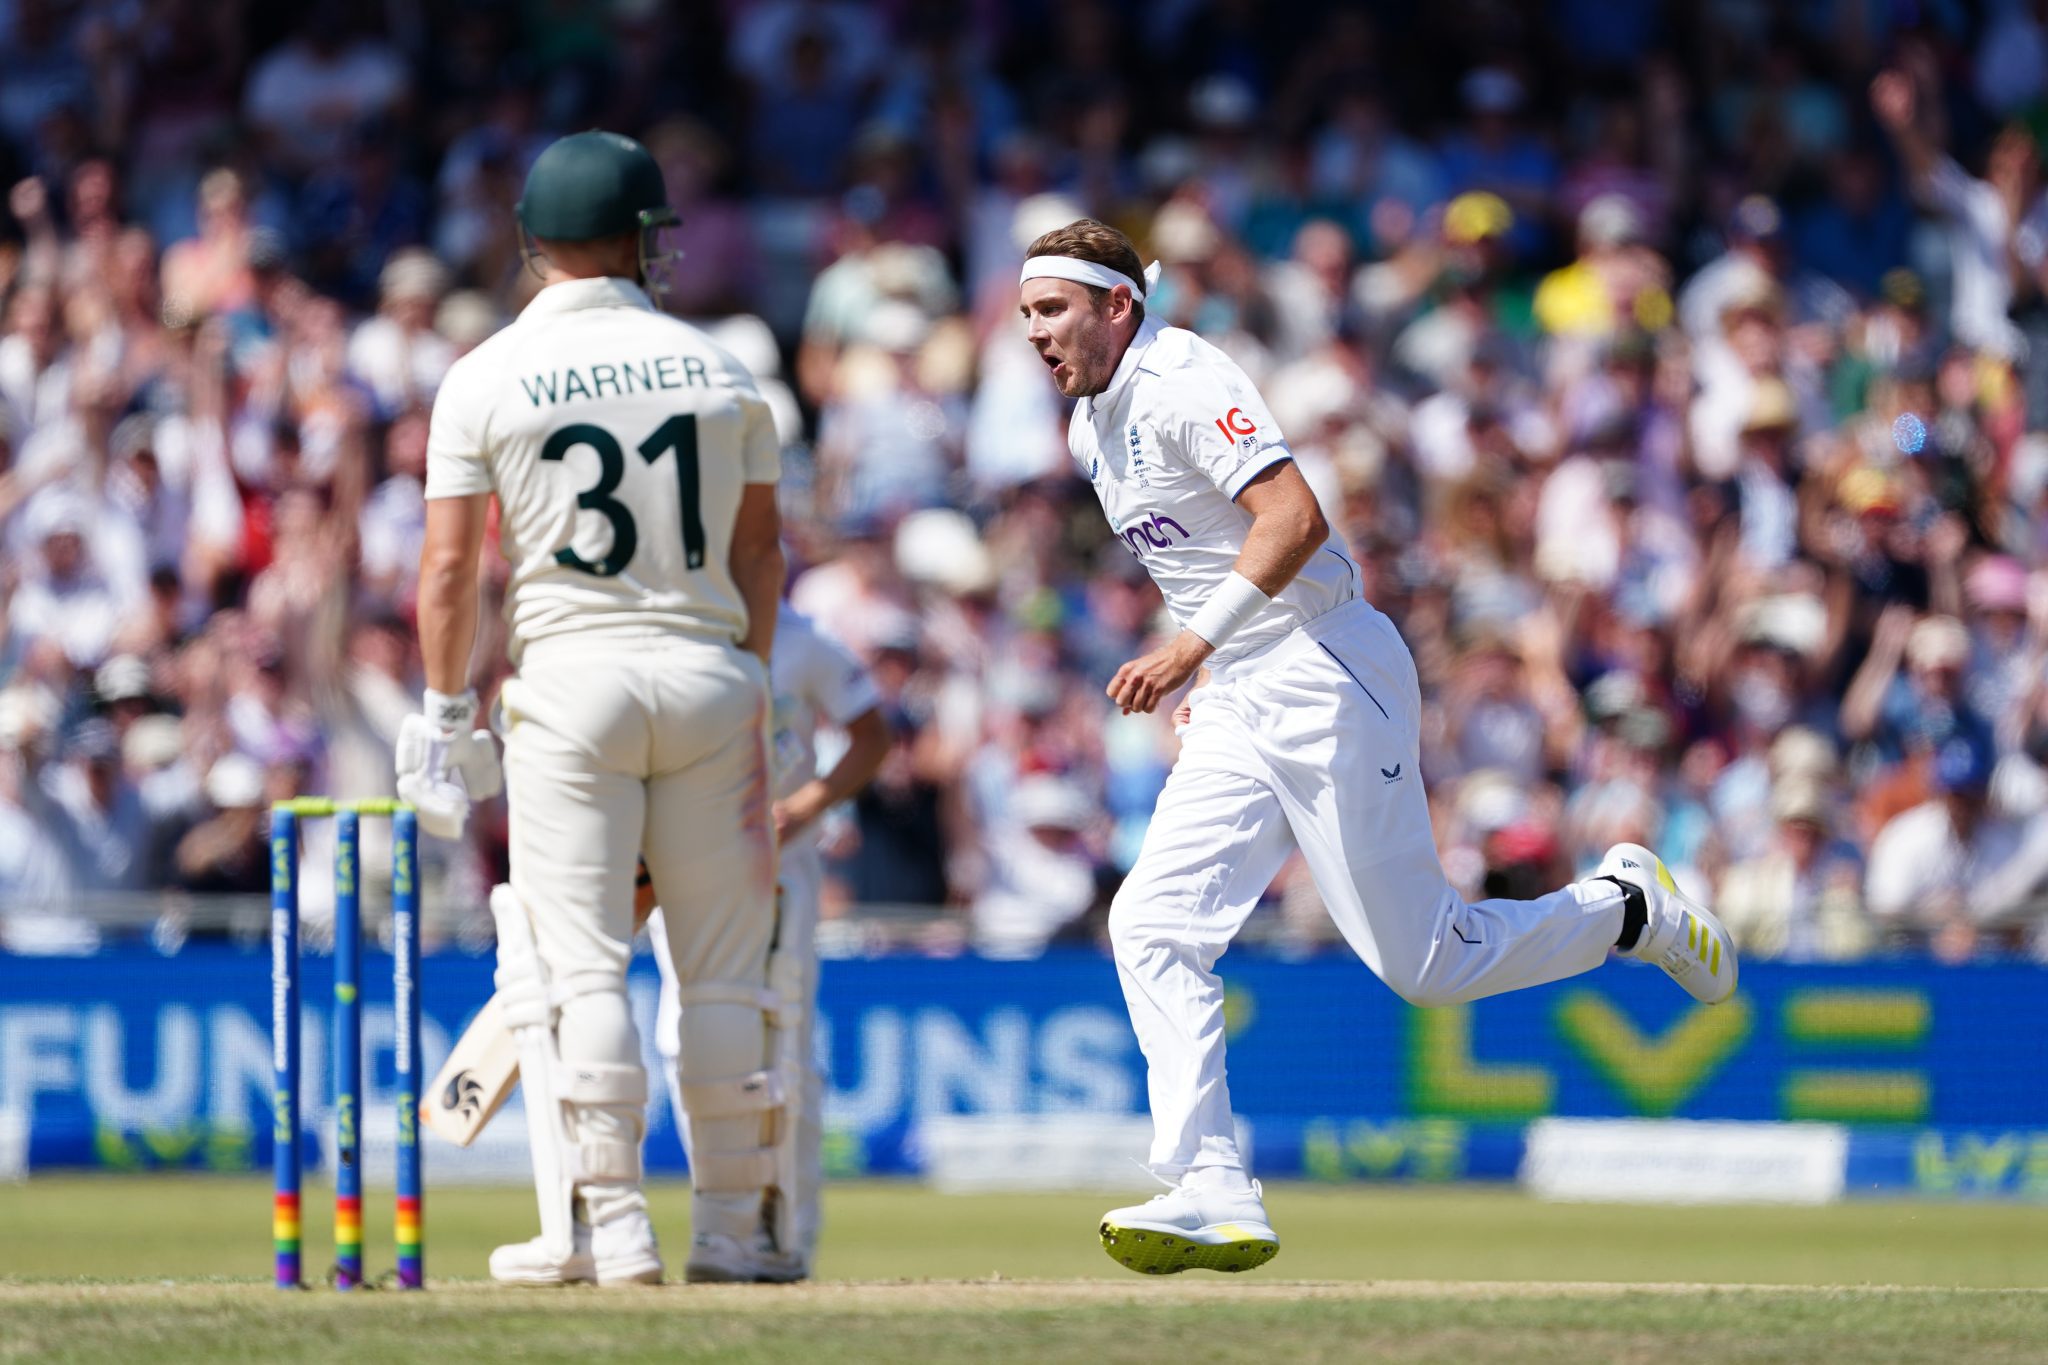 David Warner woe against Stuart Broad continues in second innings at Headingley